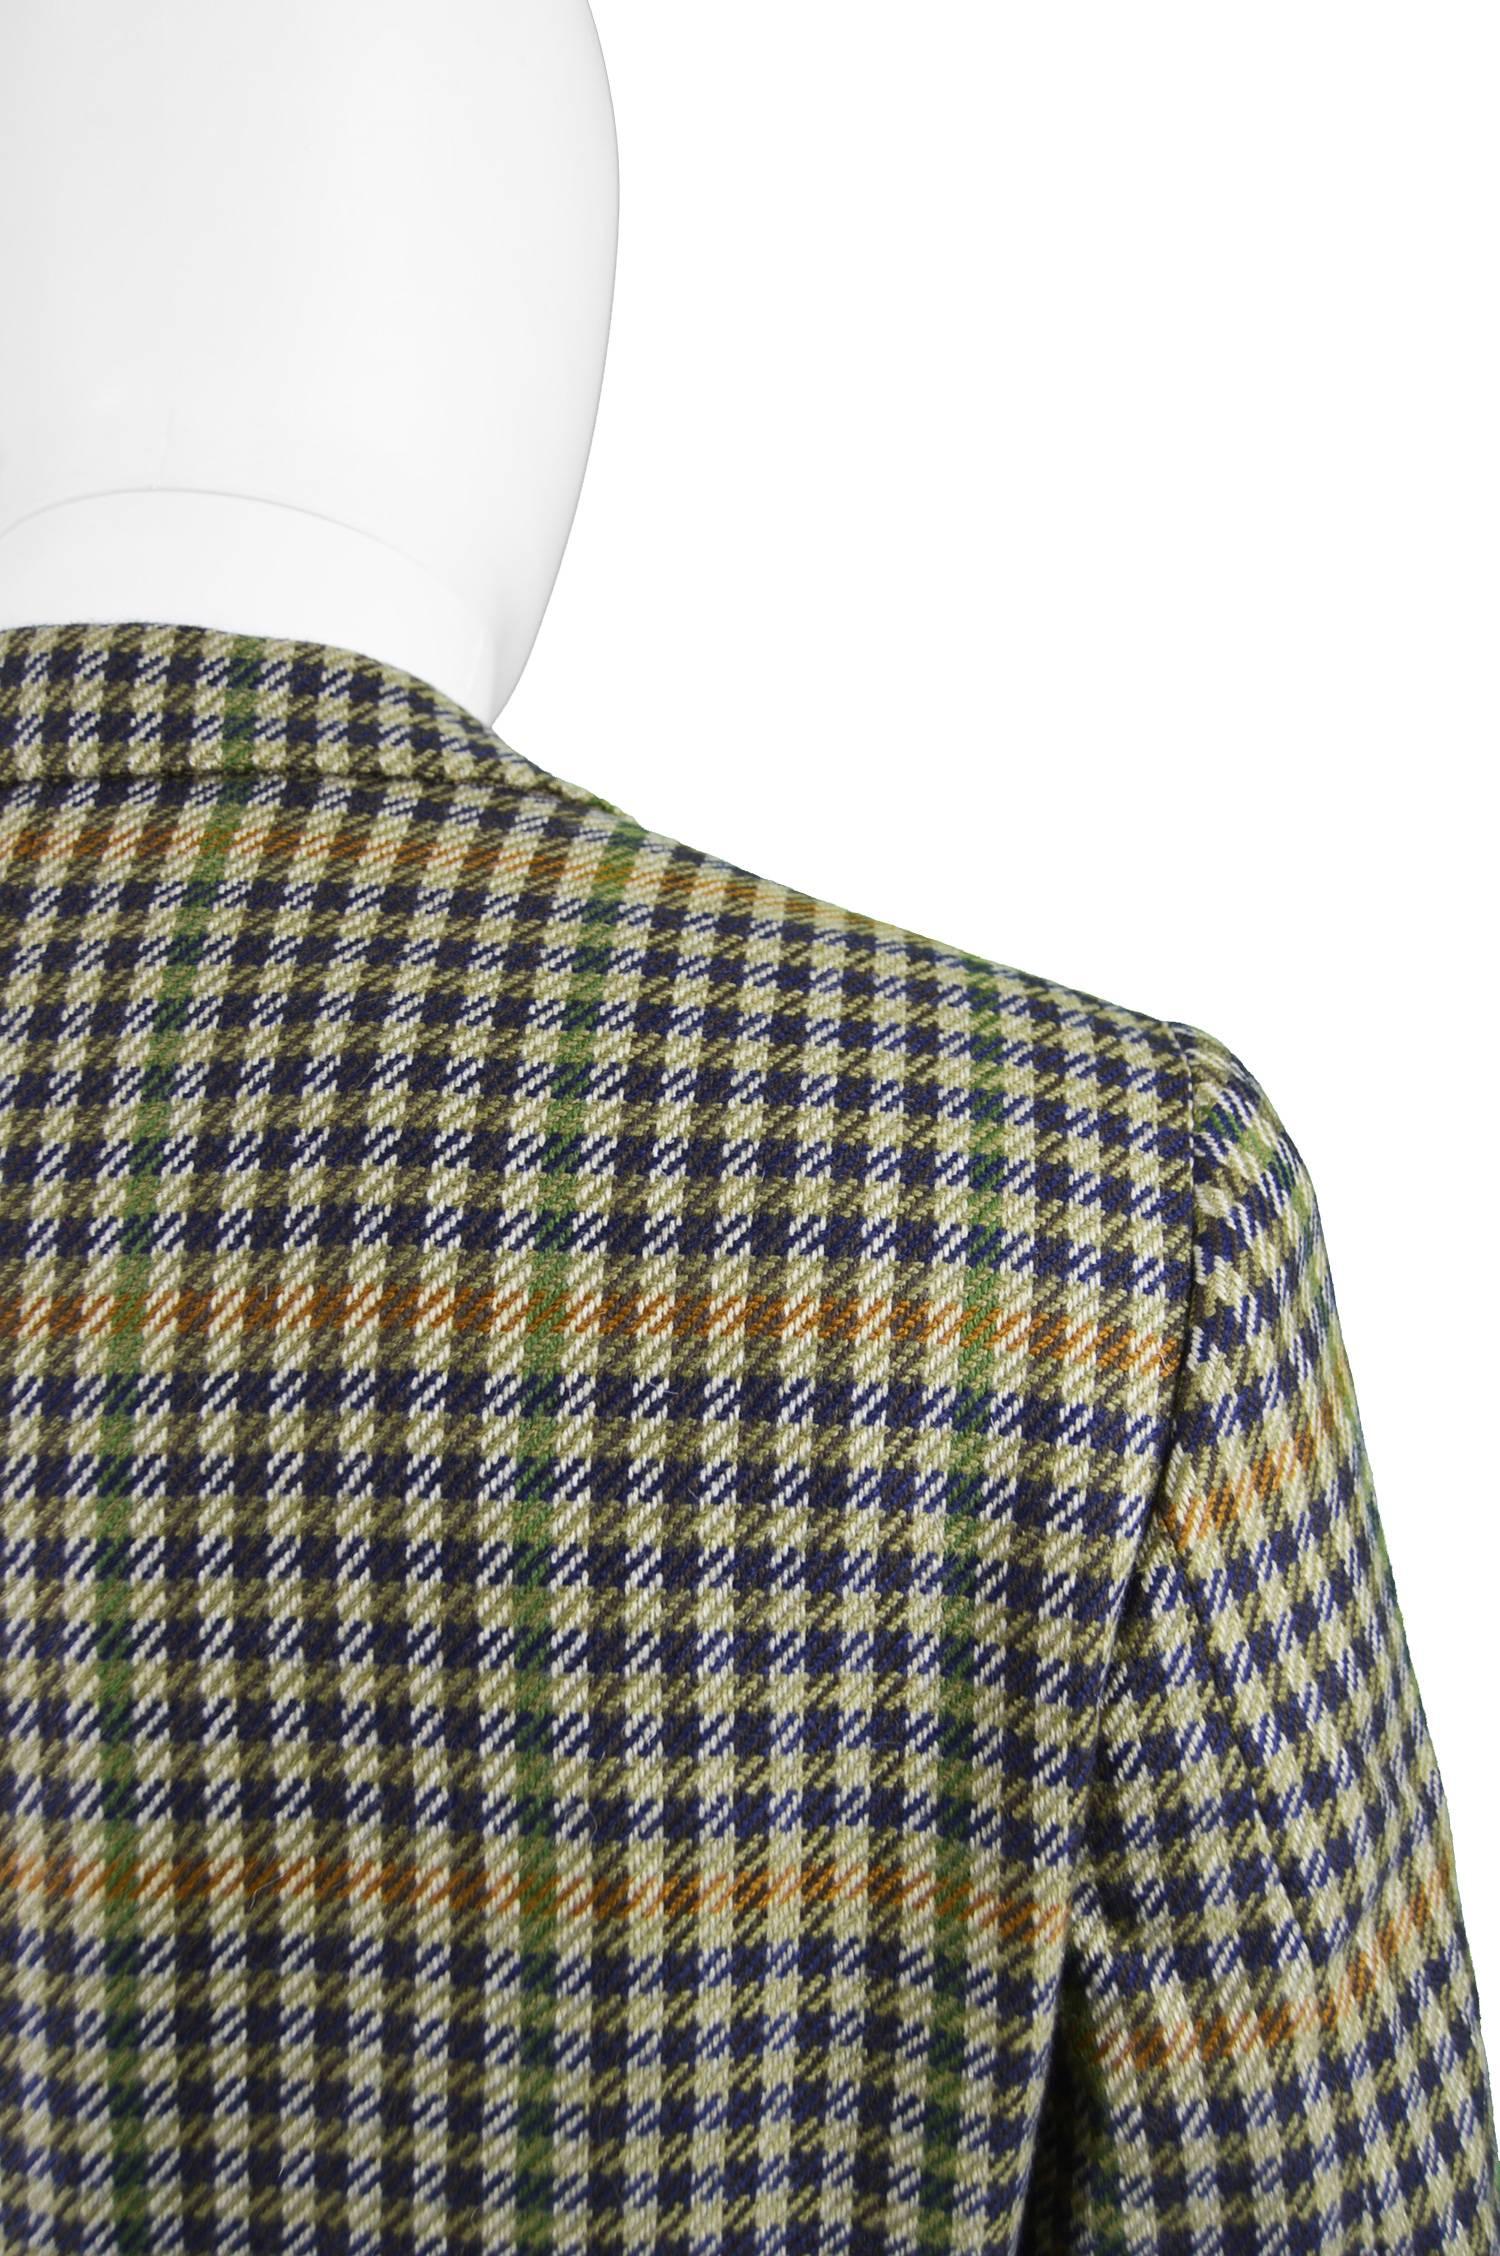 Chester Barrie for Harrods Men's Vintage Pure Cashmere Checked Jacket, 1970s For Sale 4